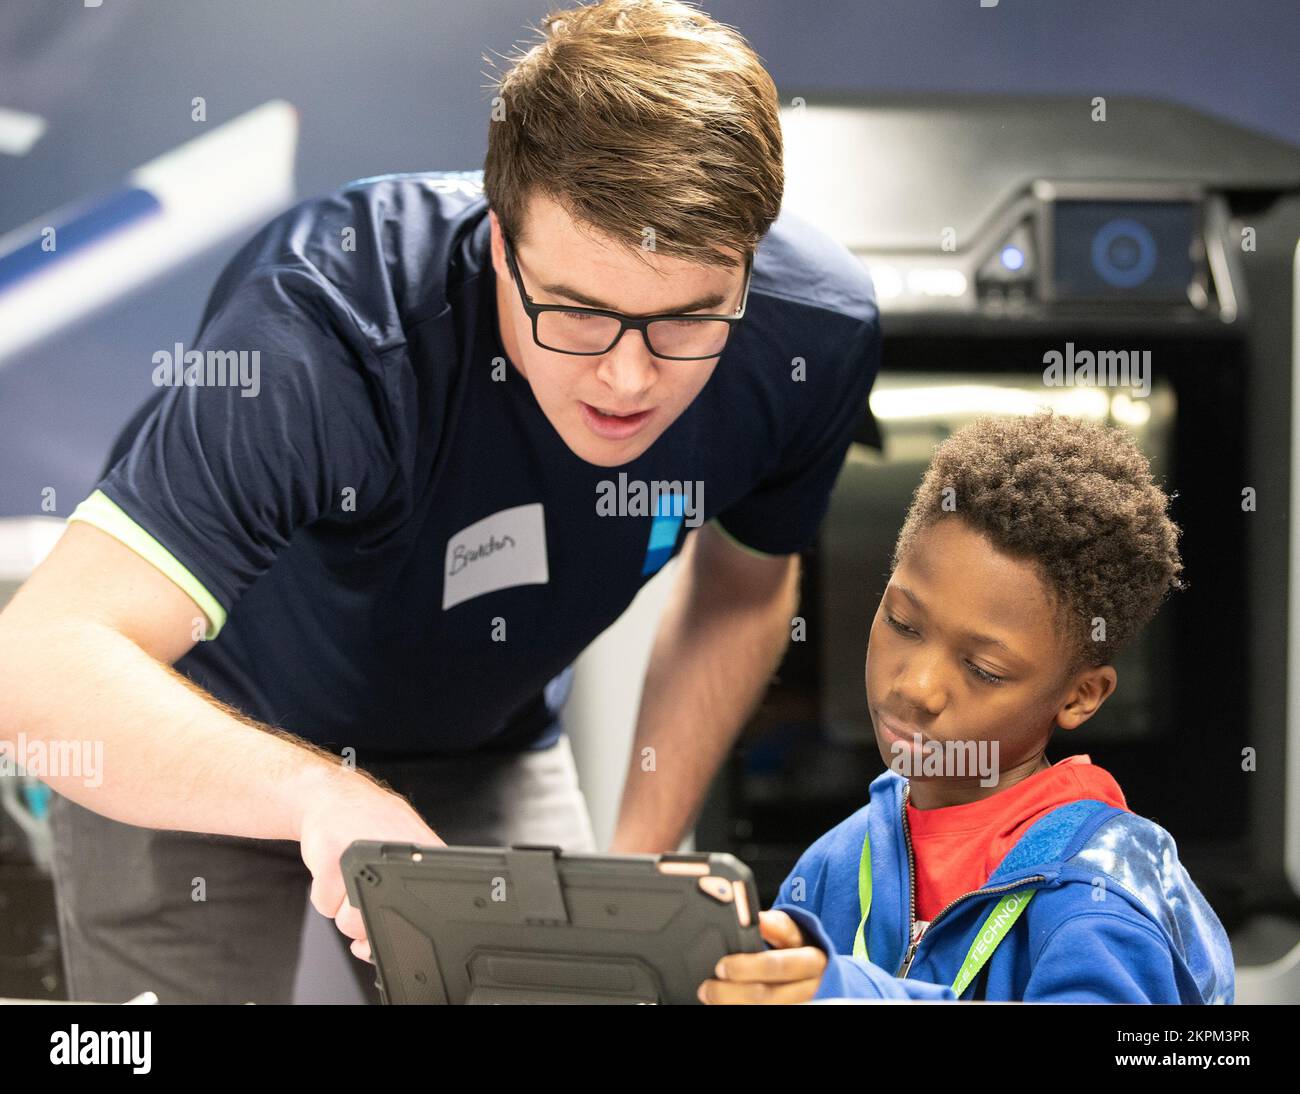 Brandon Stroick, a volunteer from the Medtronic Foundation helps a student from STARBASE Minnesota map out their Ozobots route in St. Paul, Nov. 1, 2022. The Minnesota Vikings and Medtronic volunteered their time to learn science, technology, engineering, and mathematics (STEM) from STARBASE Minnesota students. STARBASE Minnesota is a Department of Defense educational program that immerses students in real-world STEM throughout the school year and summer. Stock Photo